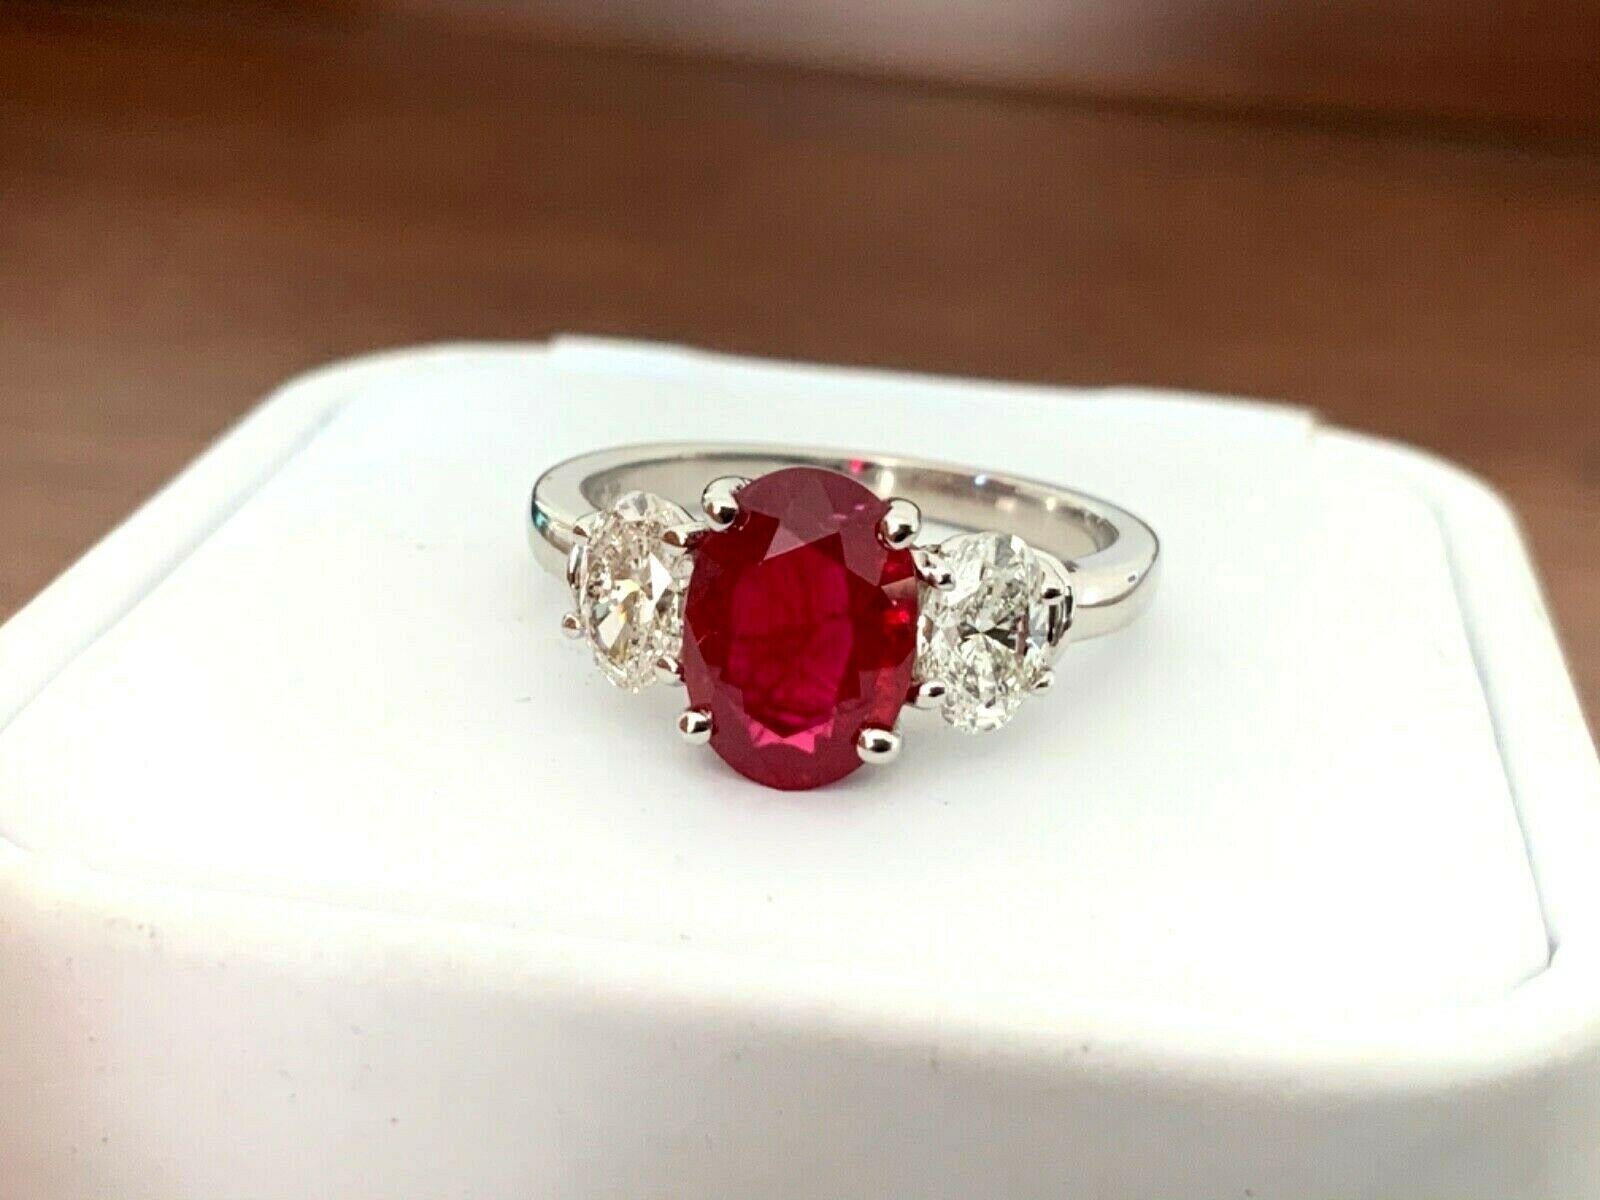 2.17 Carat Natural Vivid Red Oval Cut Burma Ruby and Diamond Ring GIA Certified 2